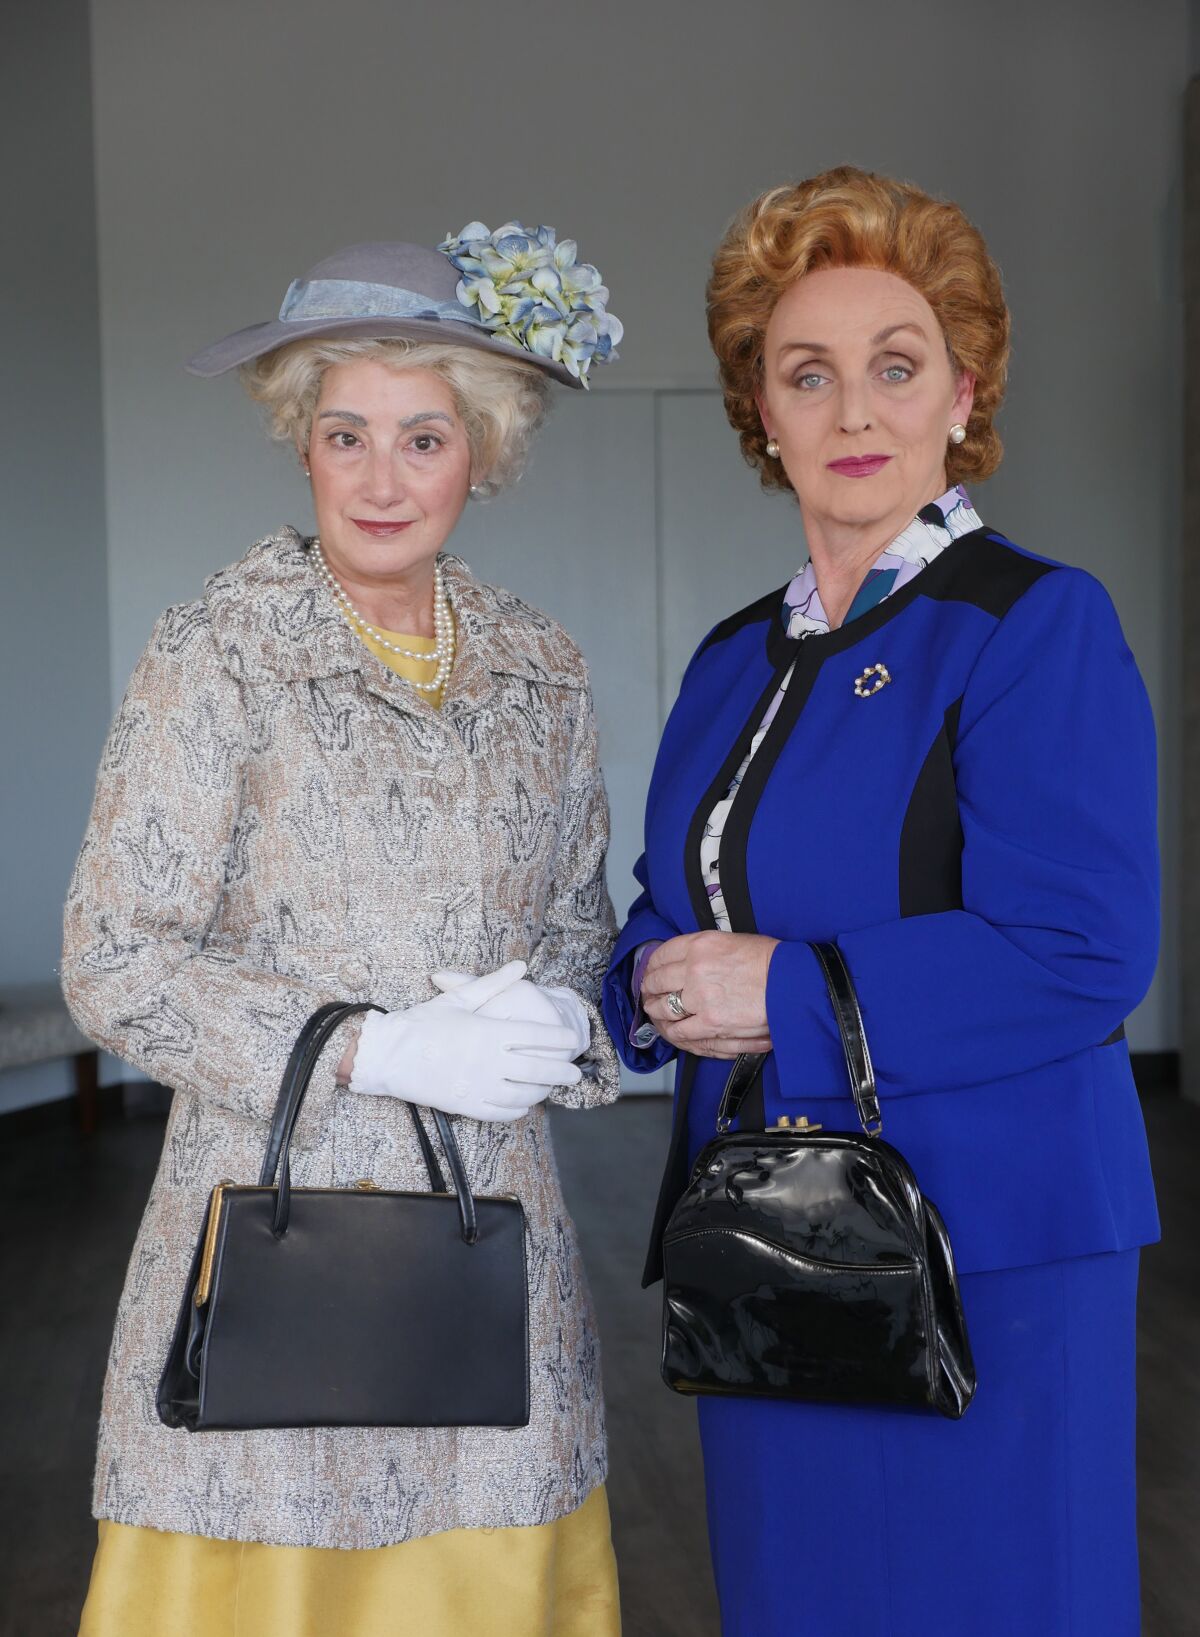 Sandy Campbell (left) and Linda Libby star in Moxie Theatre's "Handbagged."